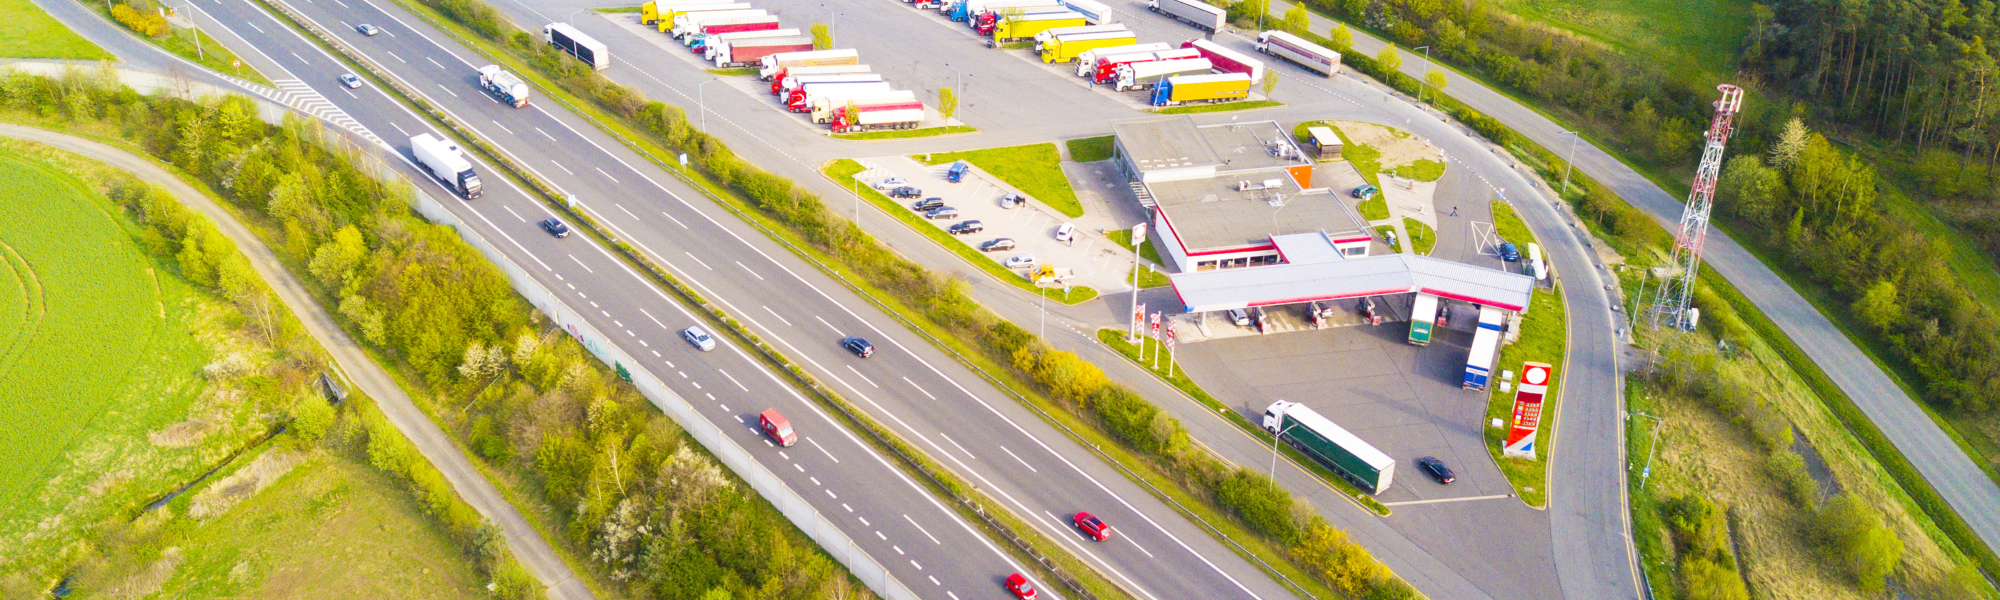 A new study funded by the European Commission seeks to quantify a major pain point for the road transport sector: the critical shortage of safe and secure parking.